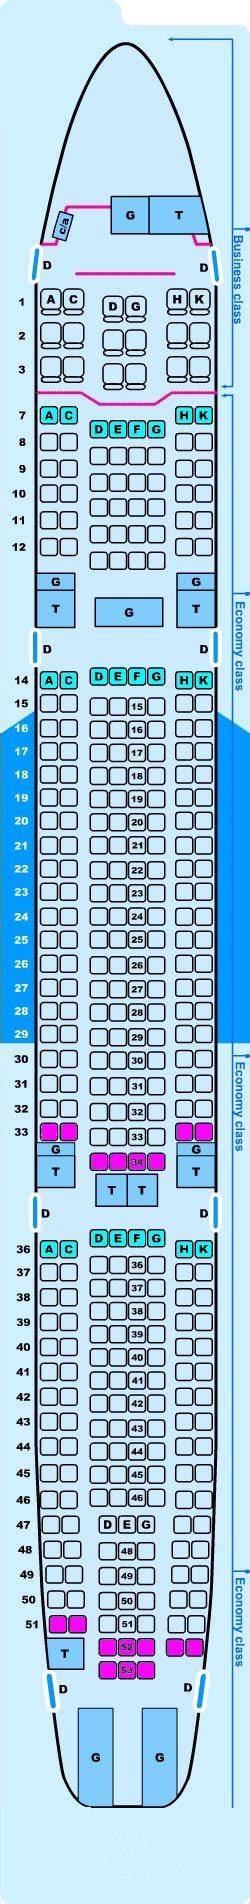 Airbus a330-300 seat chart. Seat Map Turkish Airlines Airbus A330-300 (333) Airplane Airbus A330-300 (333) Turkish Airlines with 2 classes and 289 seats on board. Use airplane seat map to find which ones are more comfortable and which should be … 